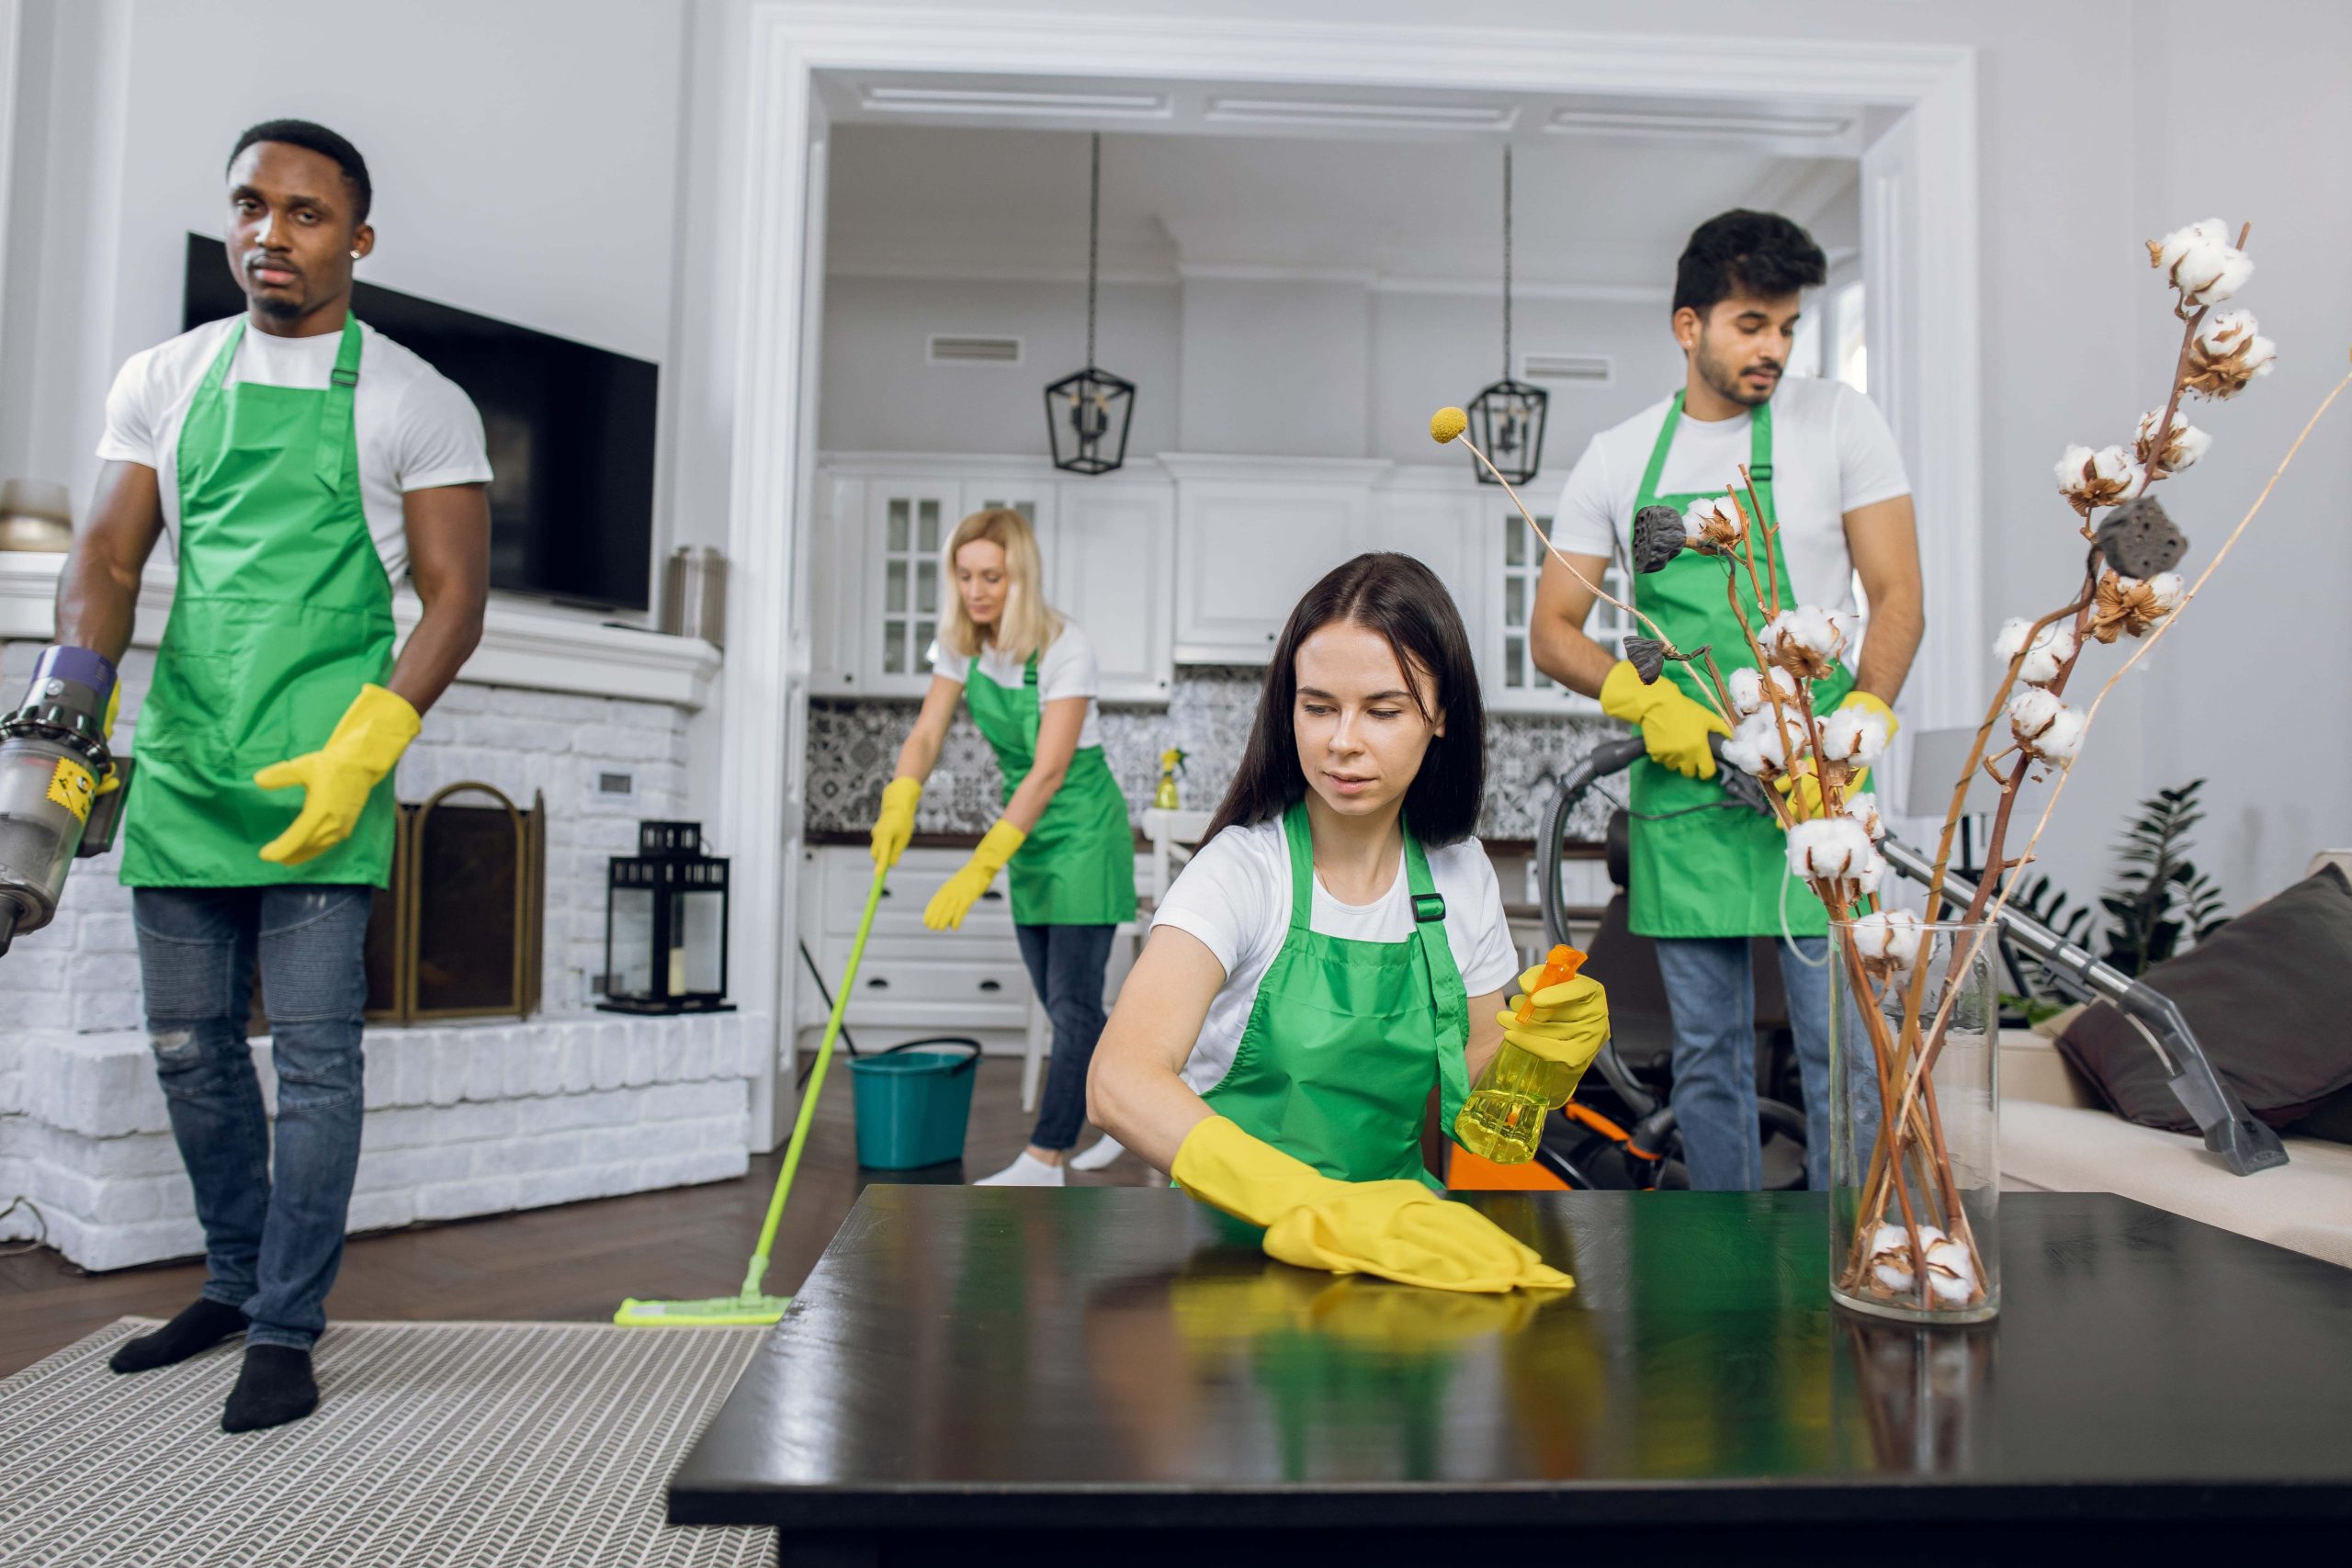 group-of-multiracial-people-professional-cleaning-2021-12-09-06-24-28-utc (1)-compressed